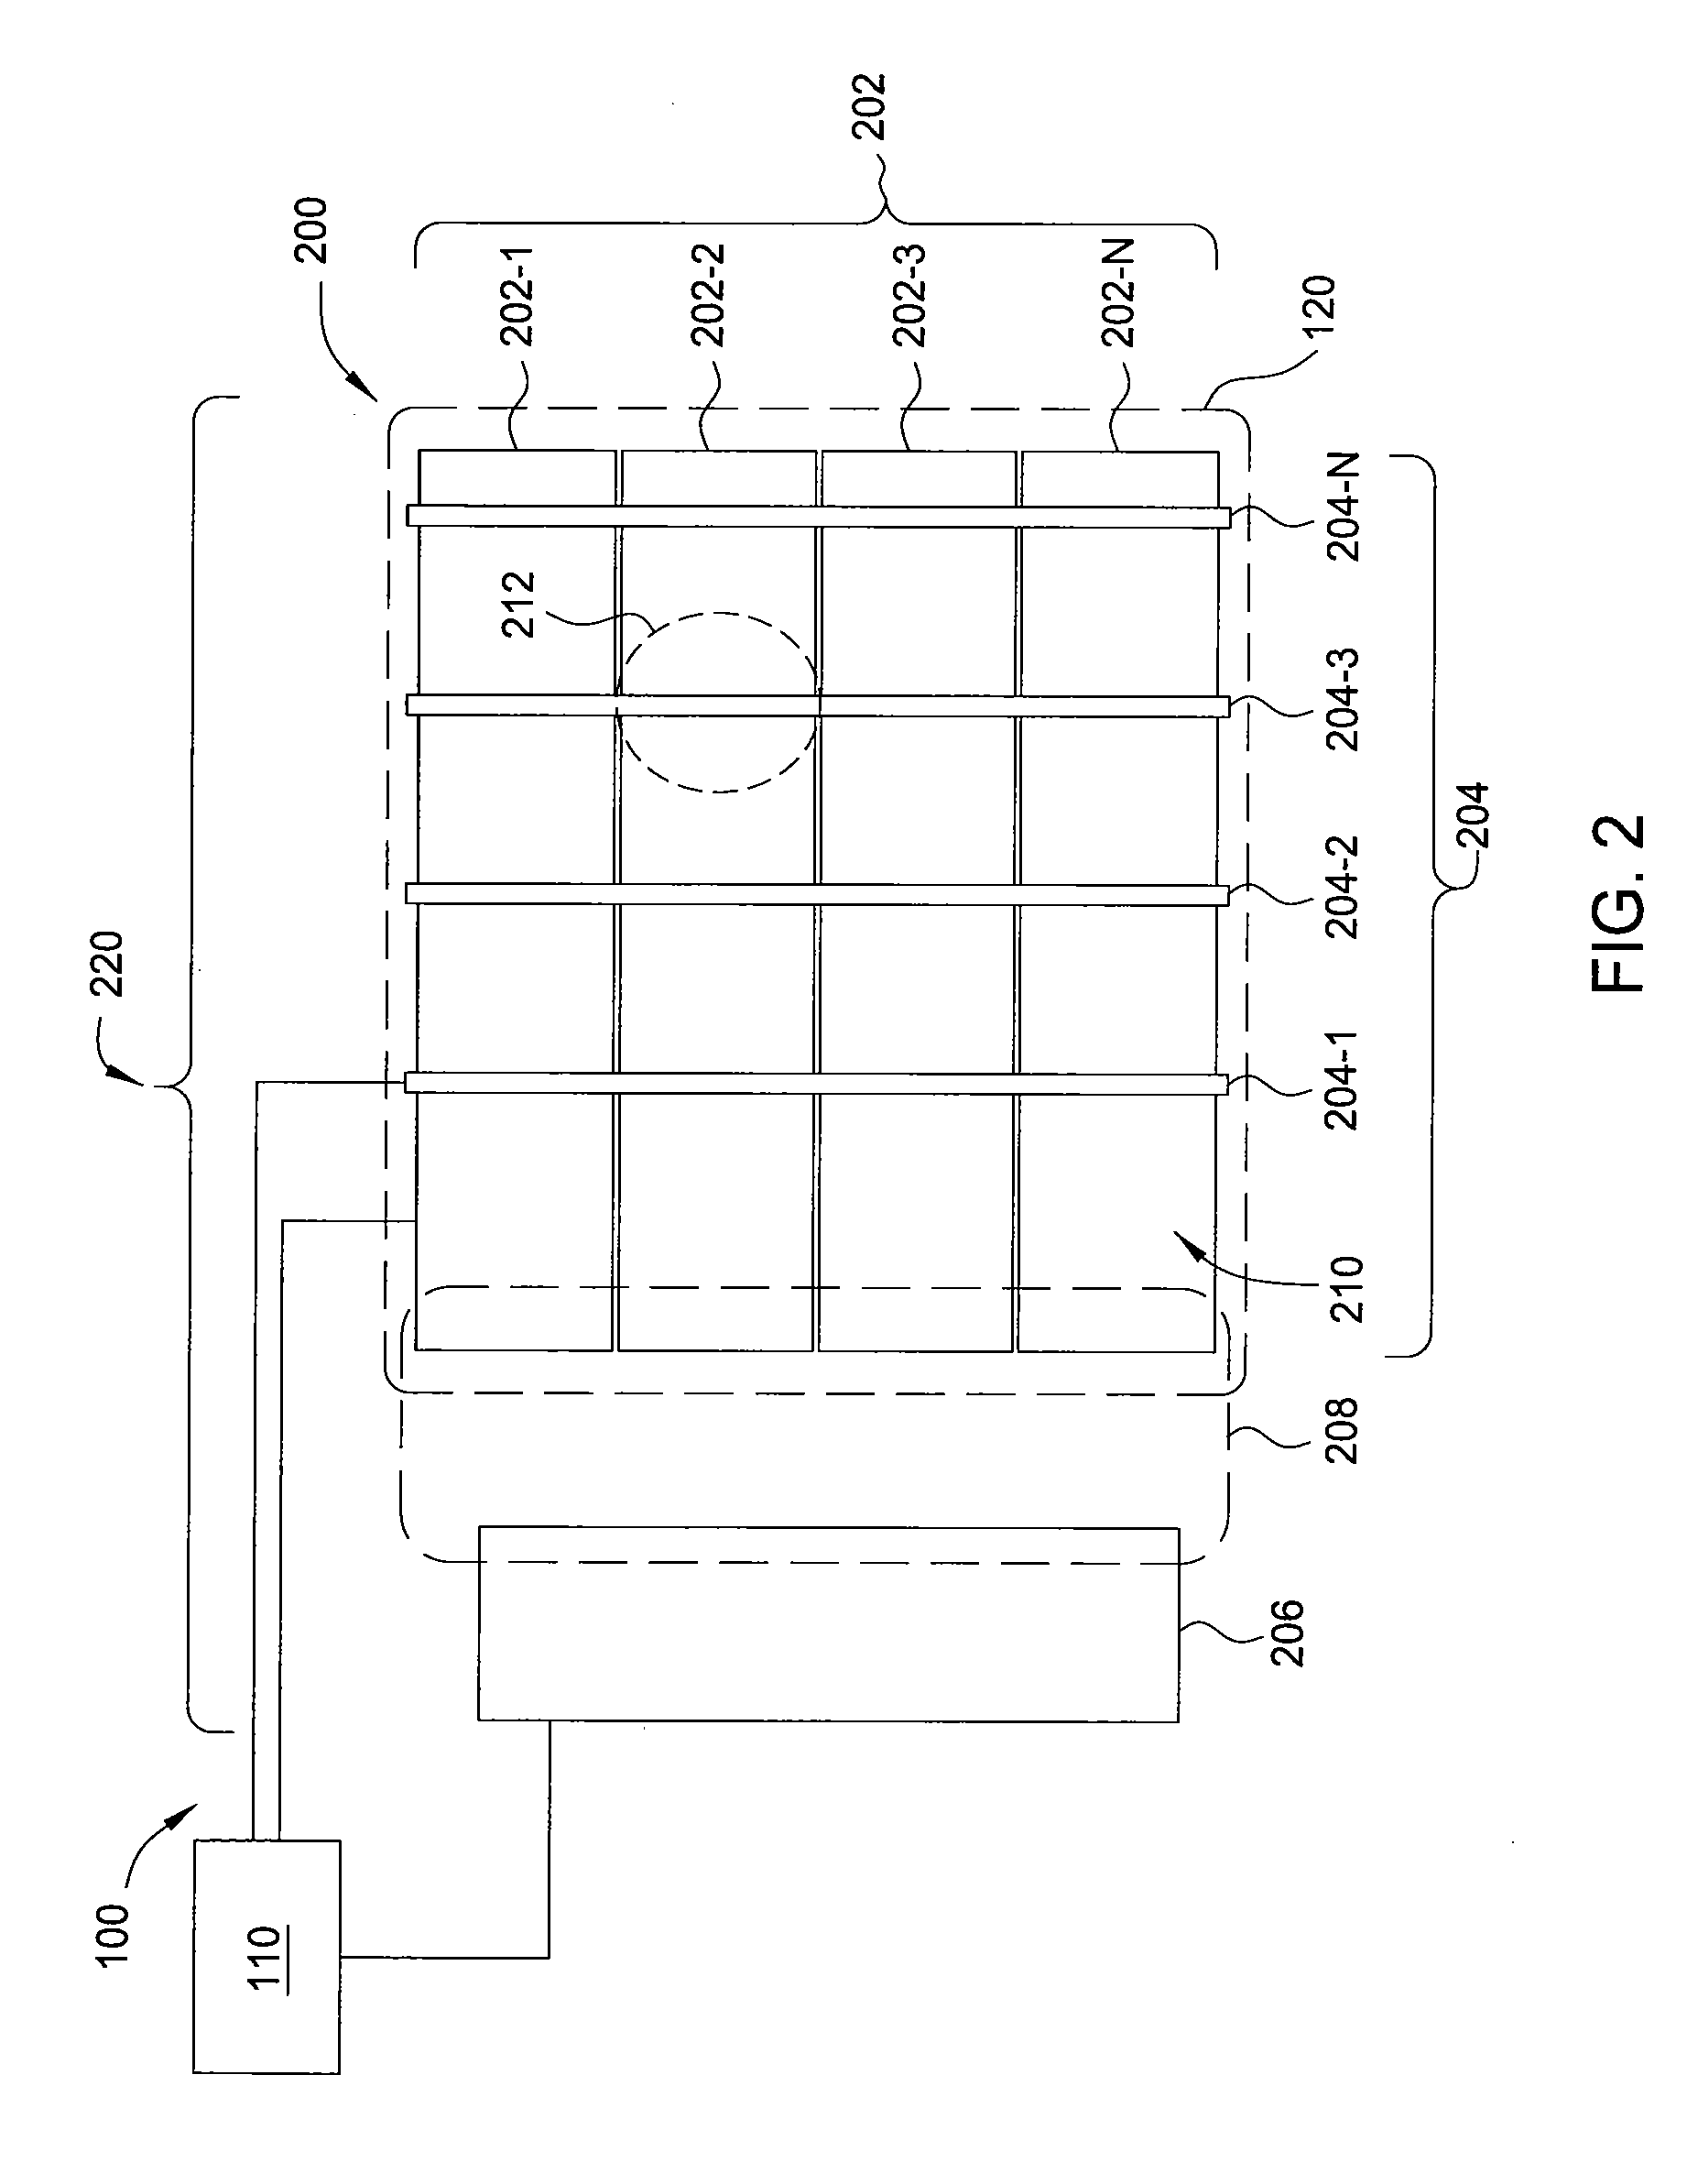 Proximity sensing for capacitive touch sensors